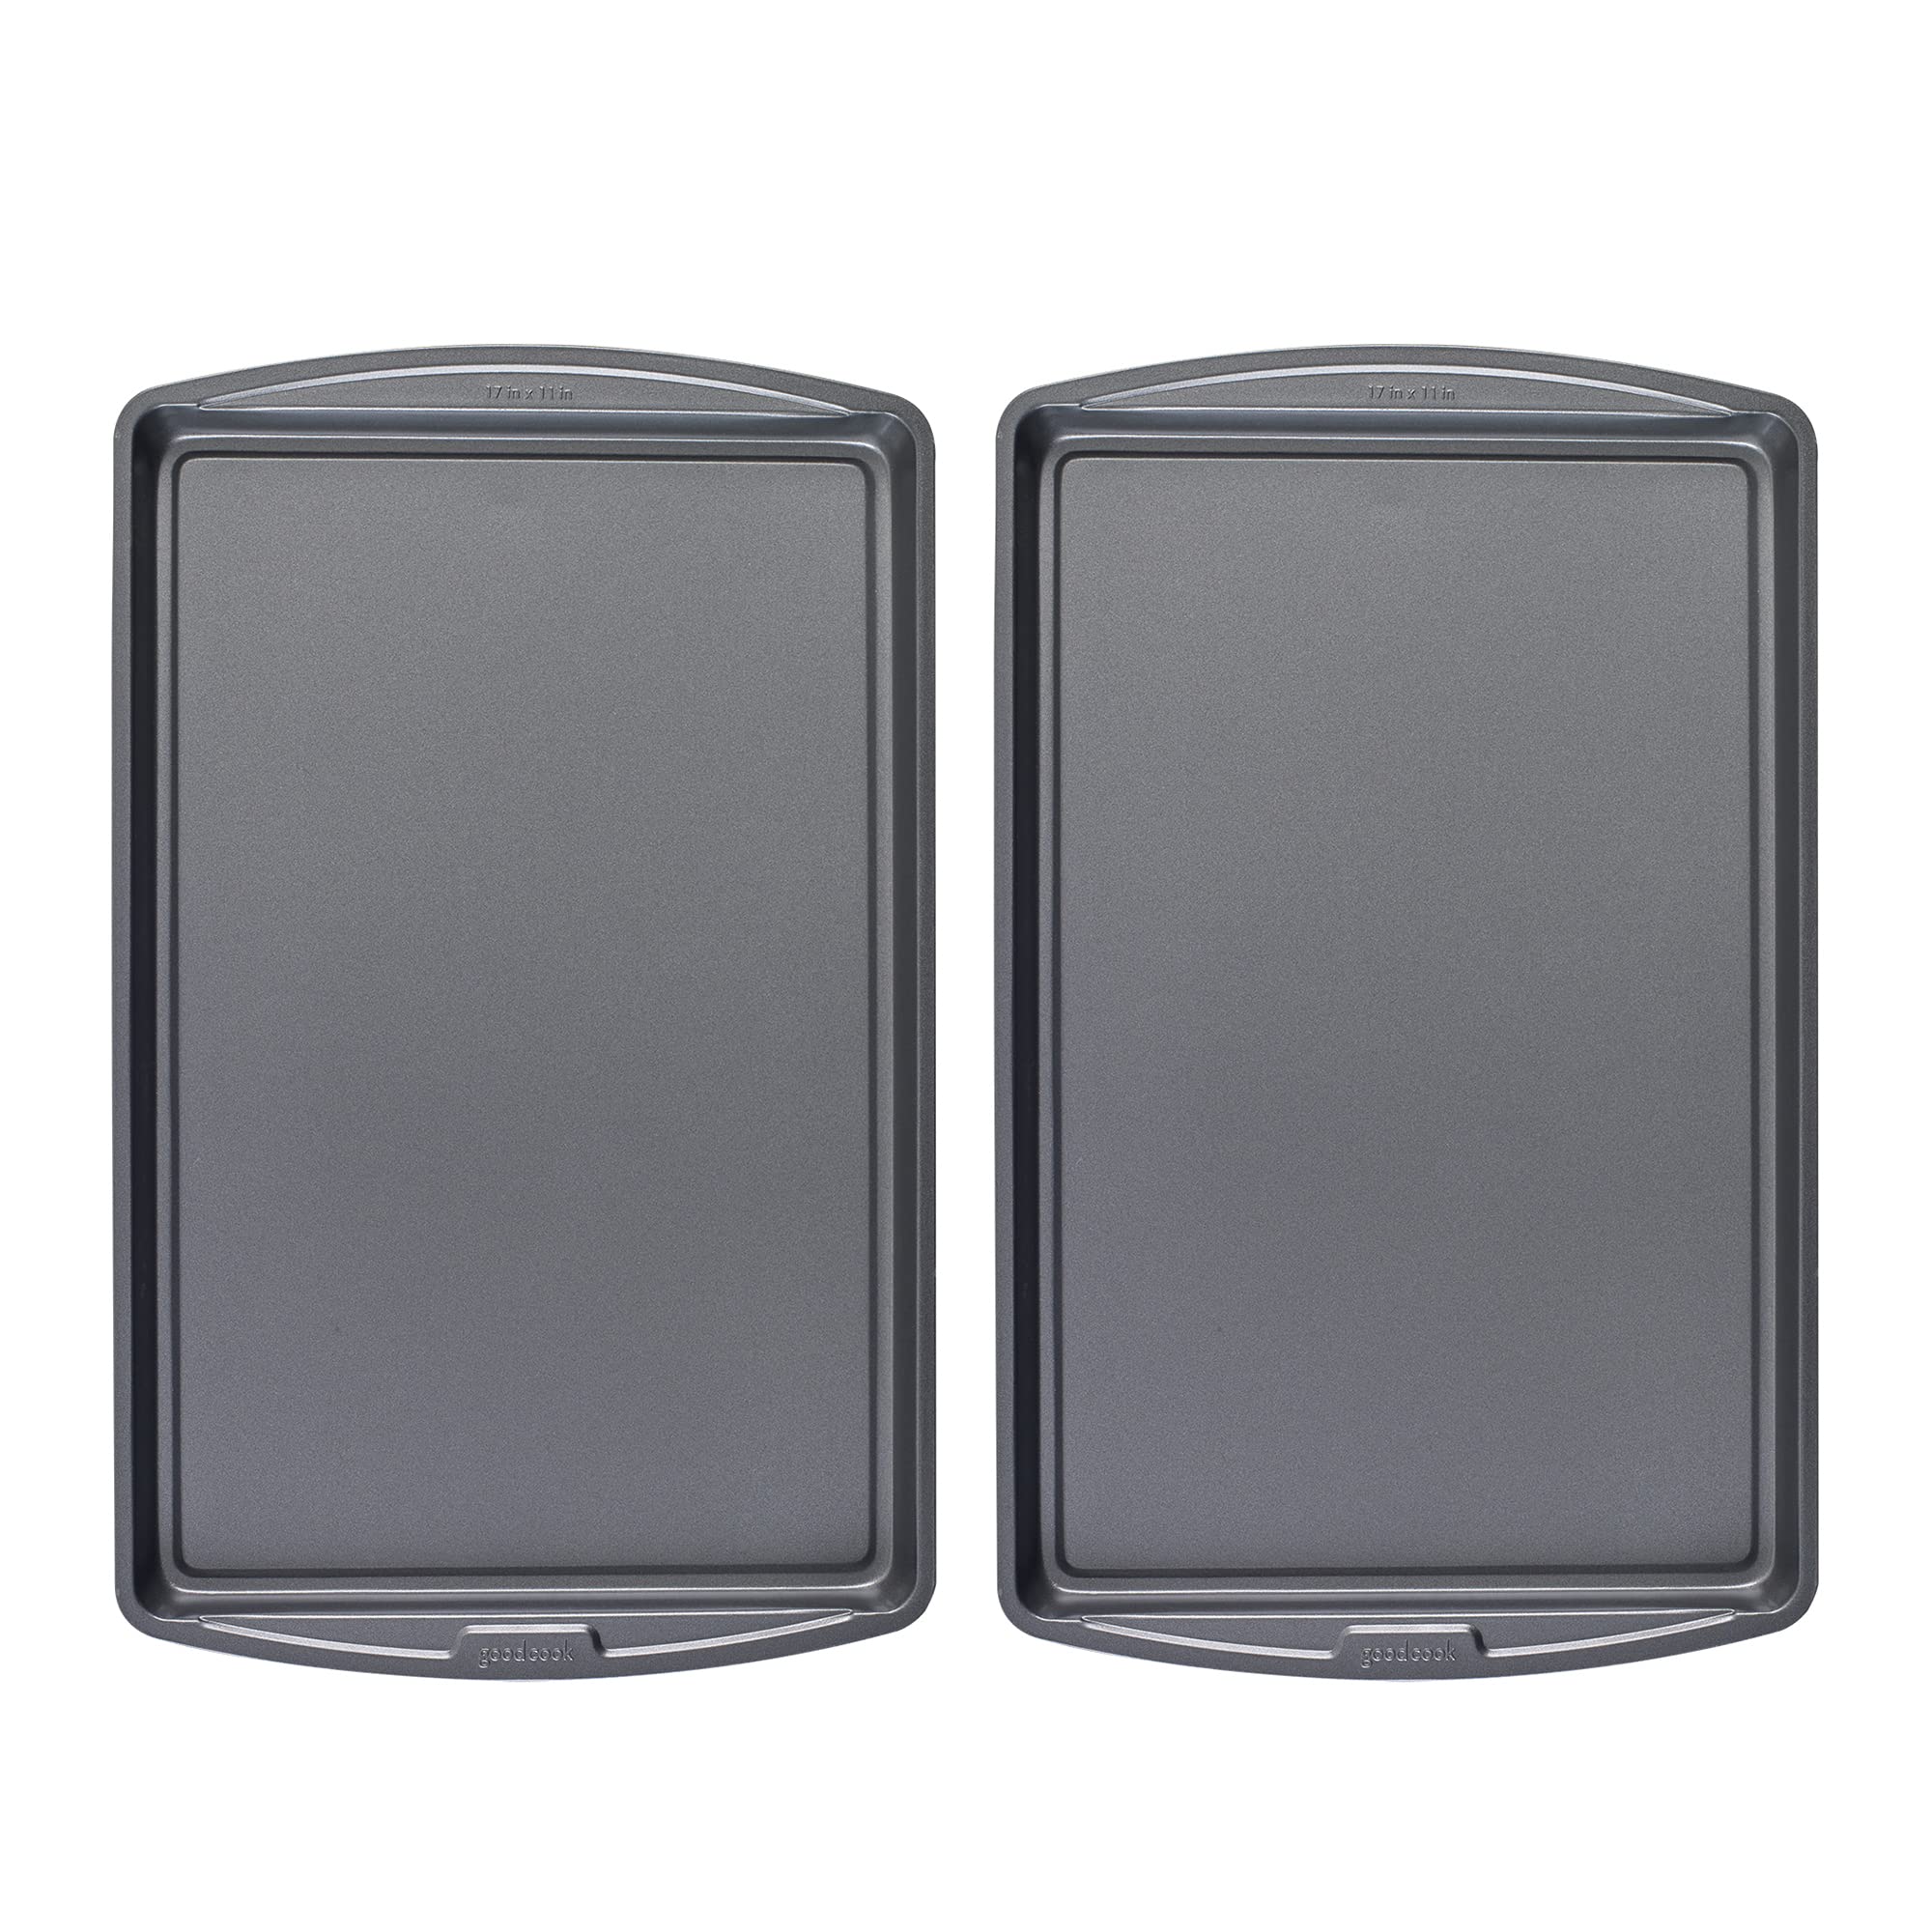 GoodCook Dishwasher Safe Nonstick Steel Cookie Sheet, 11'' x 17'', Gray, Set of 2, Silver (42051)